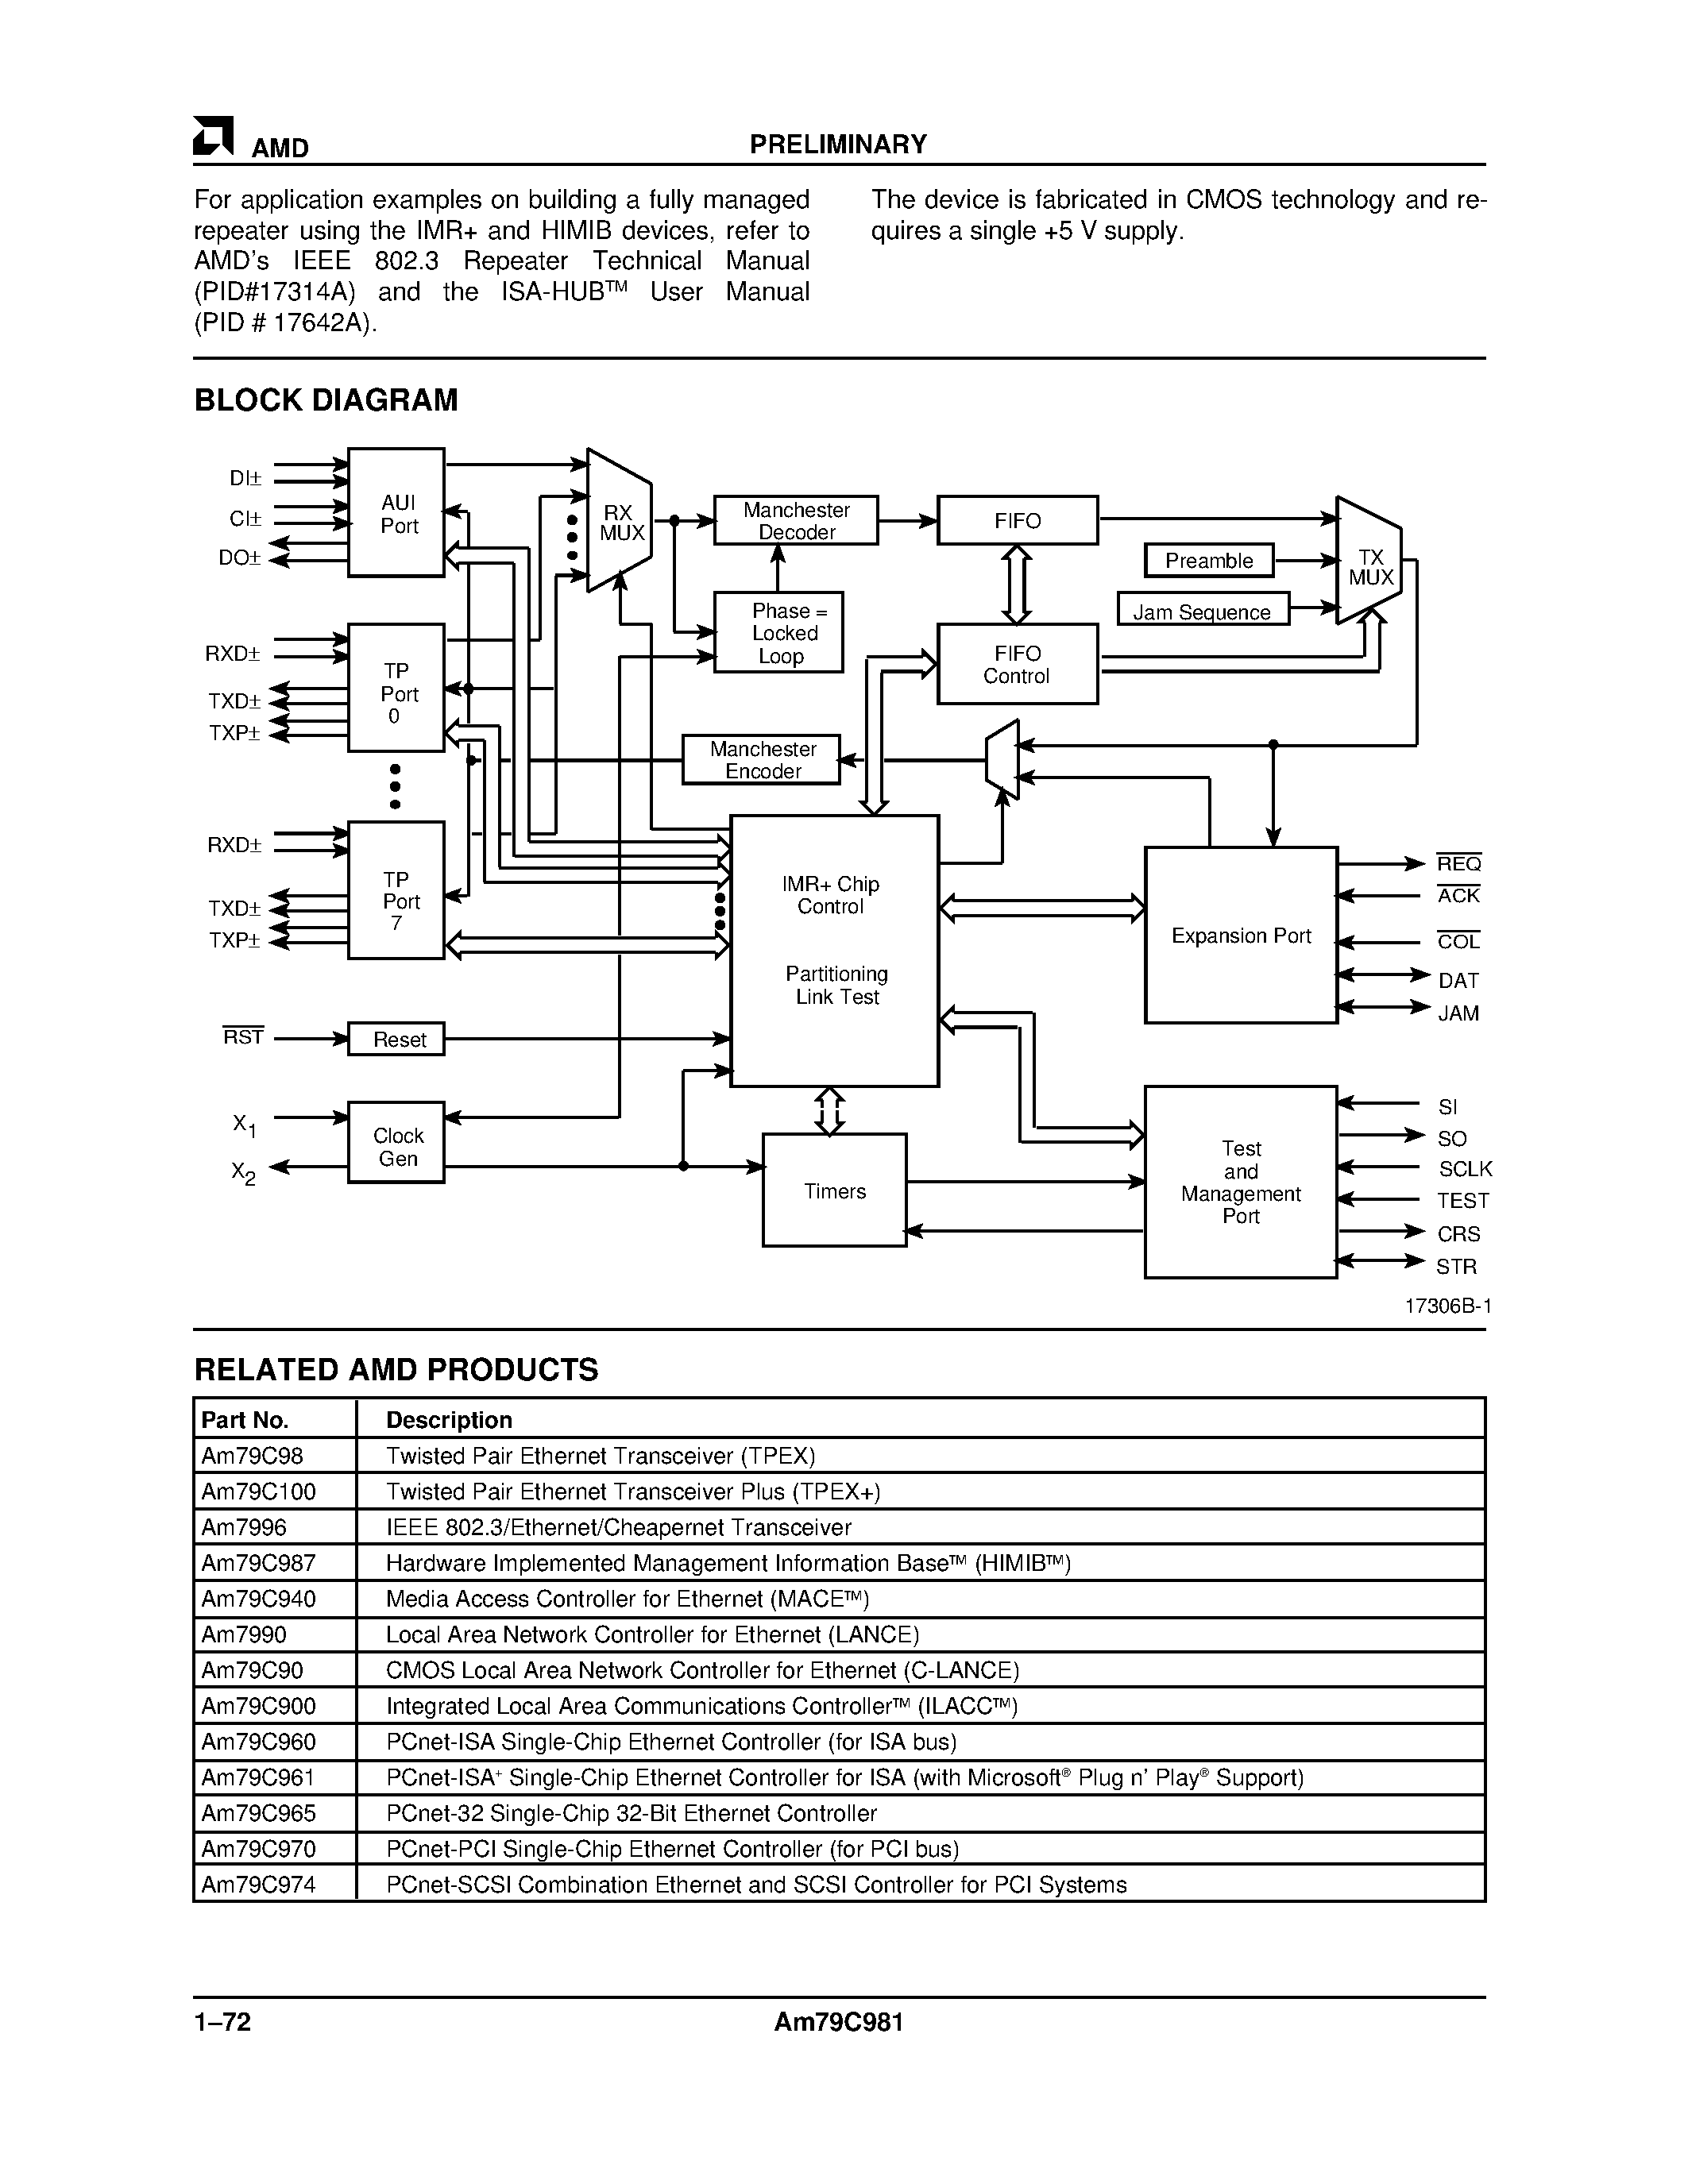 Datasheet Am79C981JC - Integrated Multiport Repeater Plus (IMR+) page 2